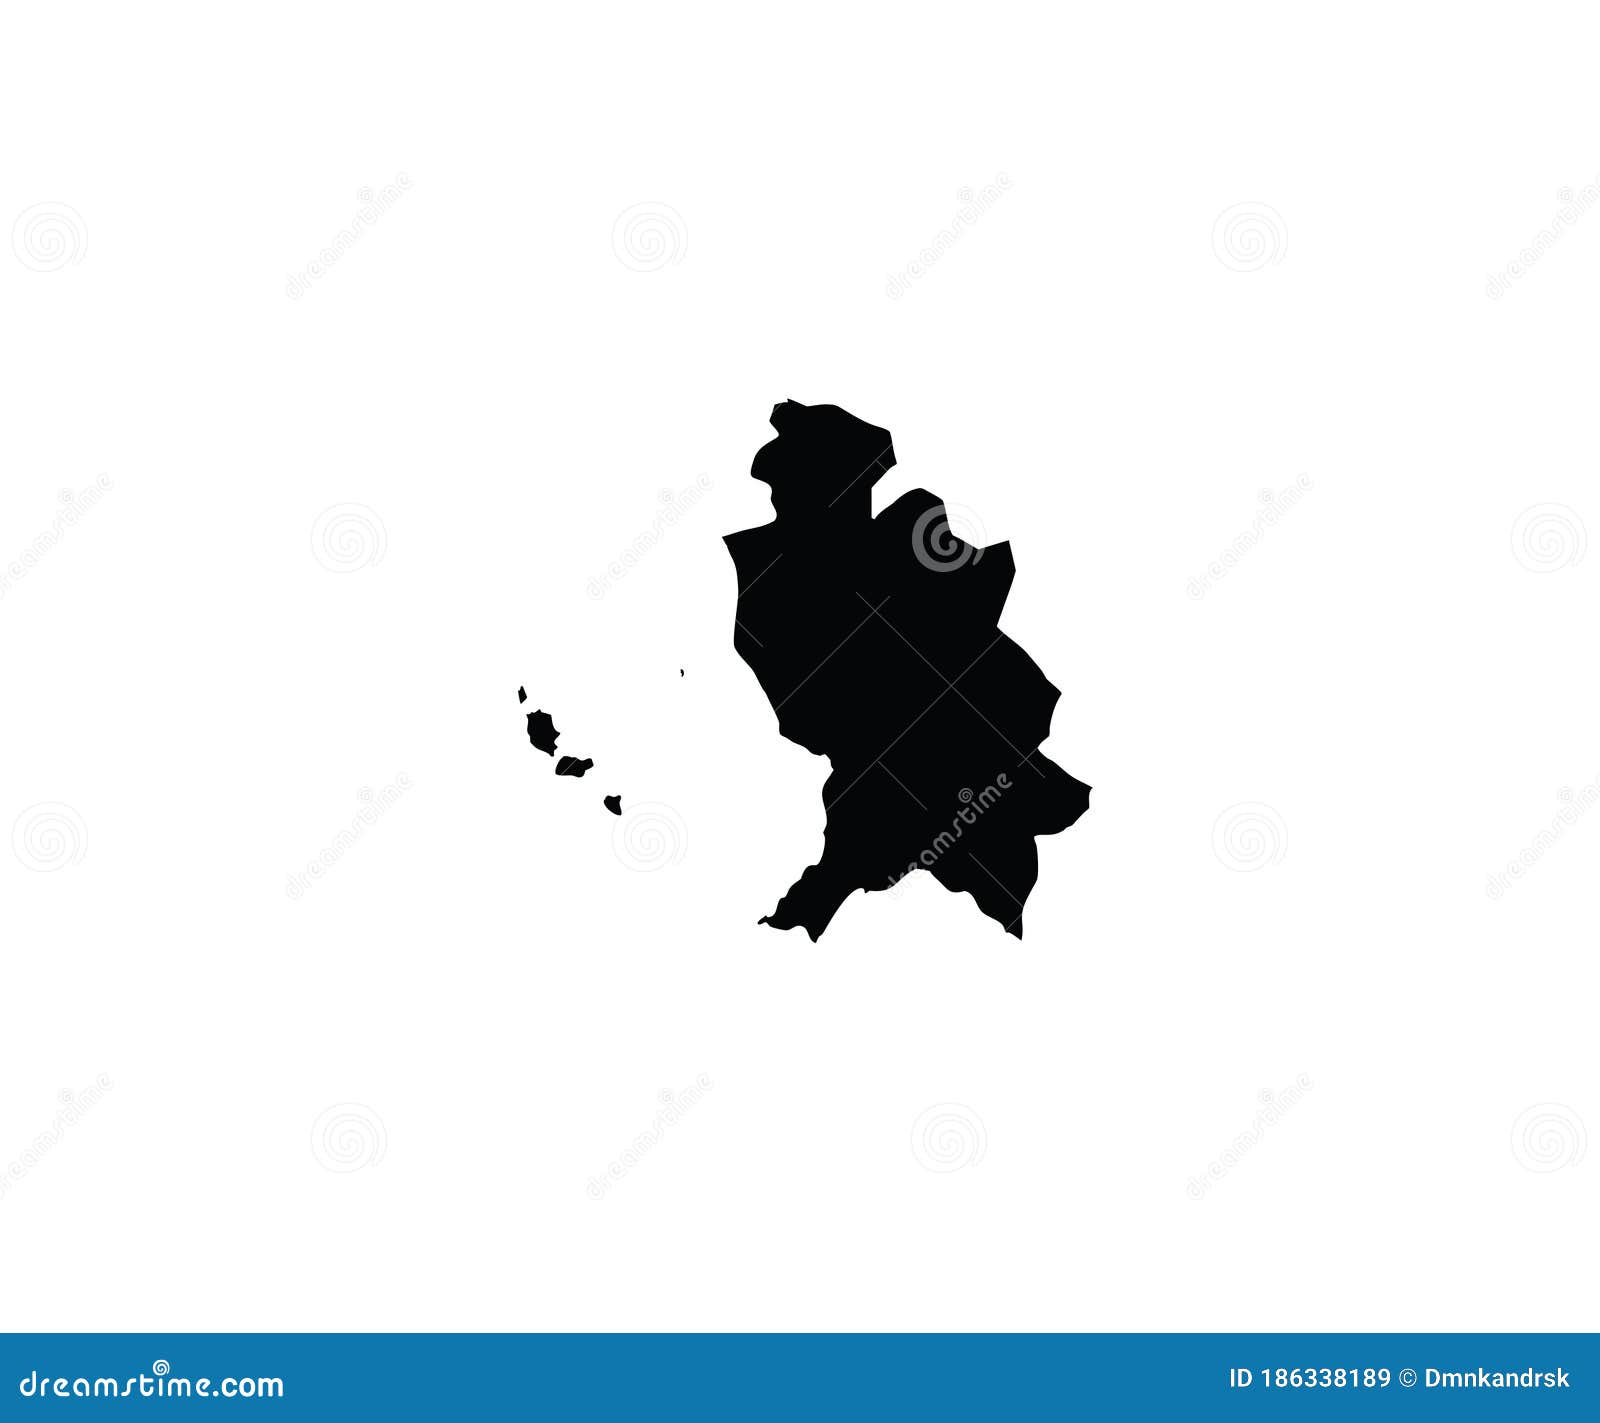 nayarit outline map mexico state